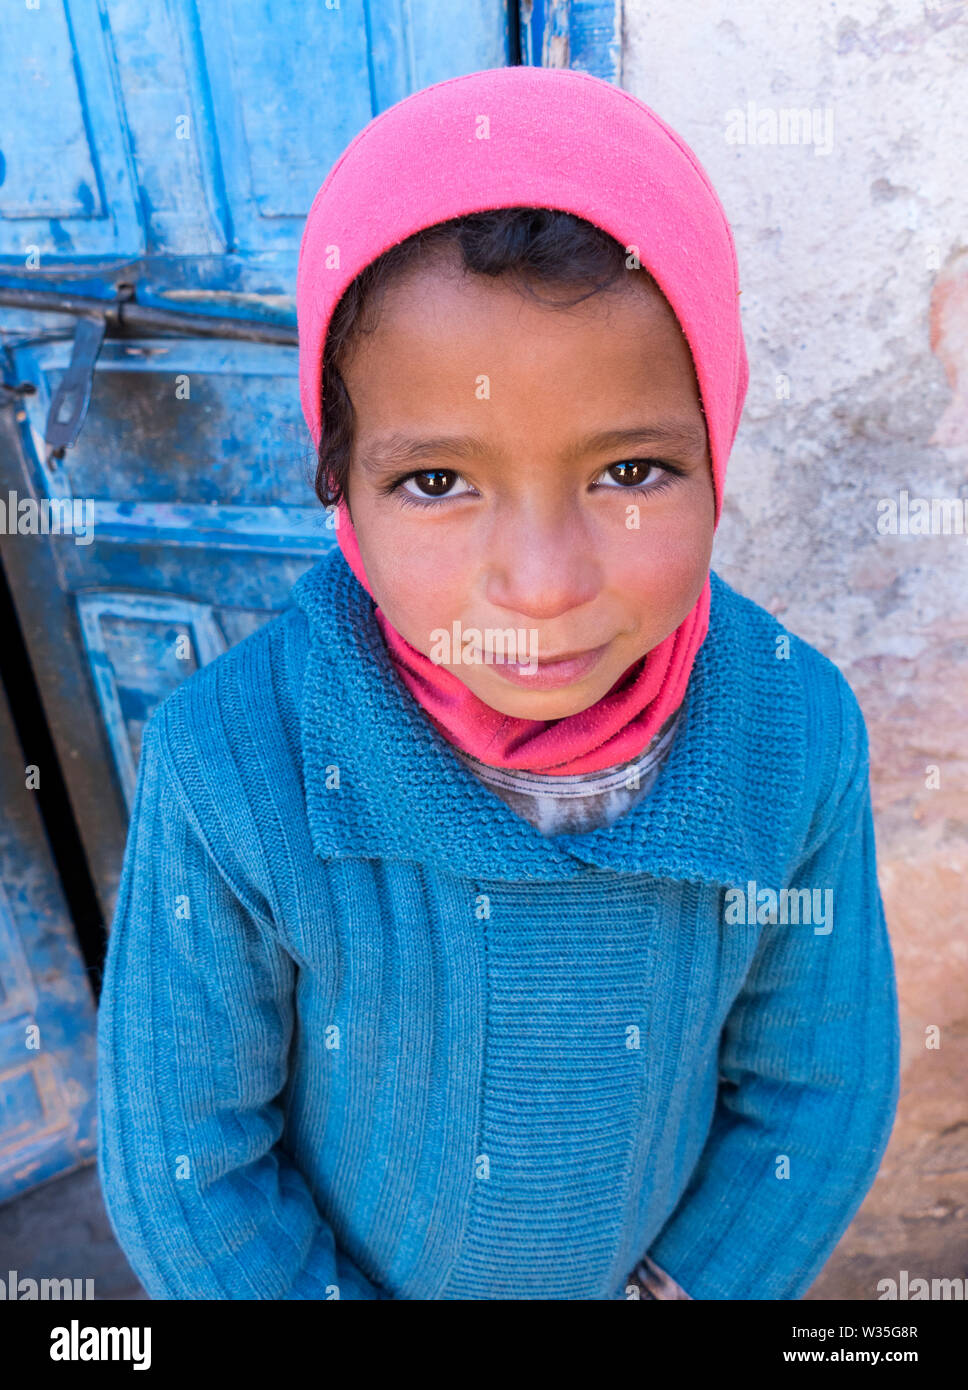 A Close Up of a Traditonal Little Berber Girl Looking Up at the Camera in the Traditional Berber Head Covering in a Village near Marrakresh in Morocco Stock Photo